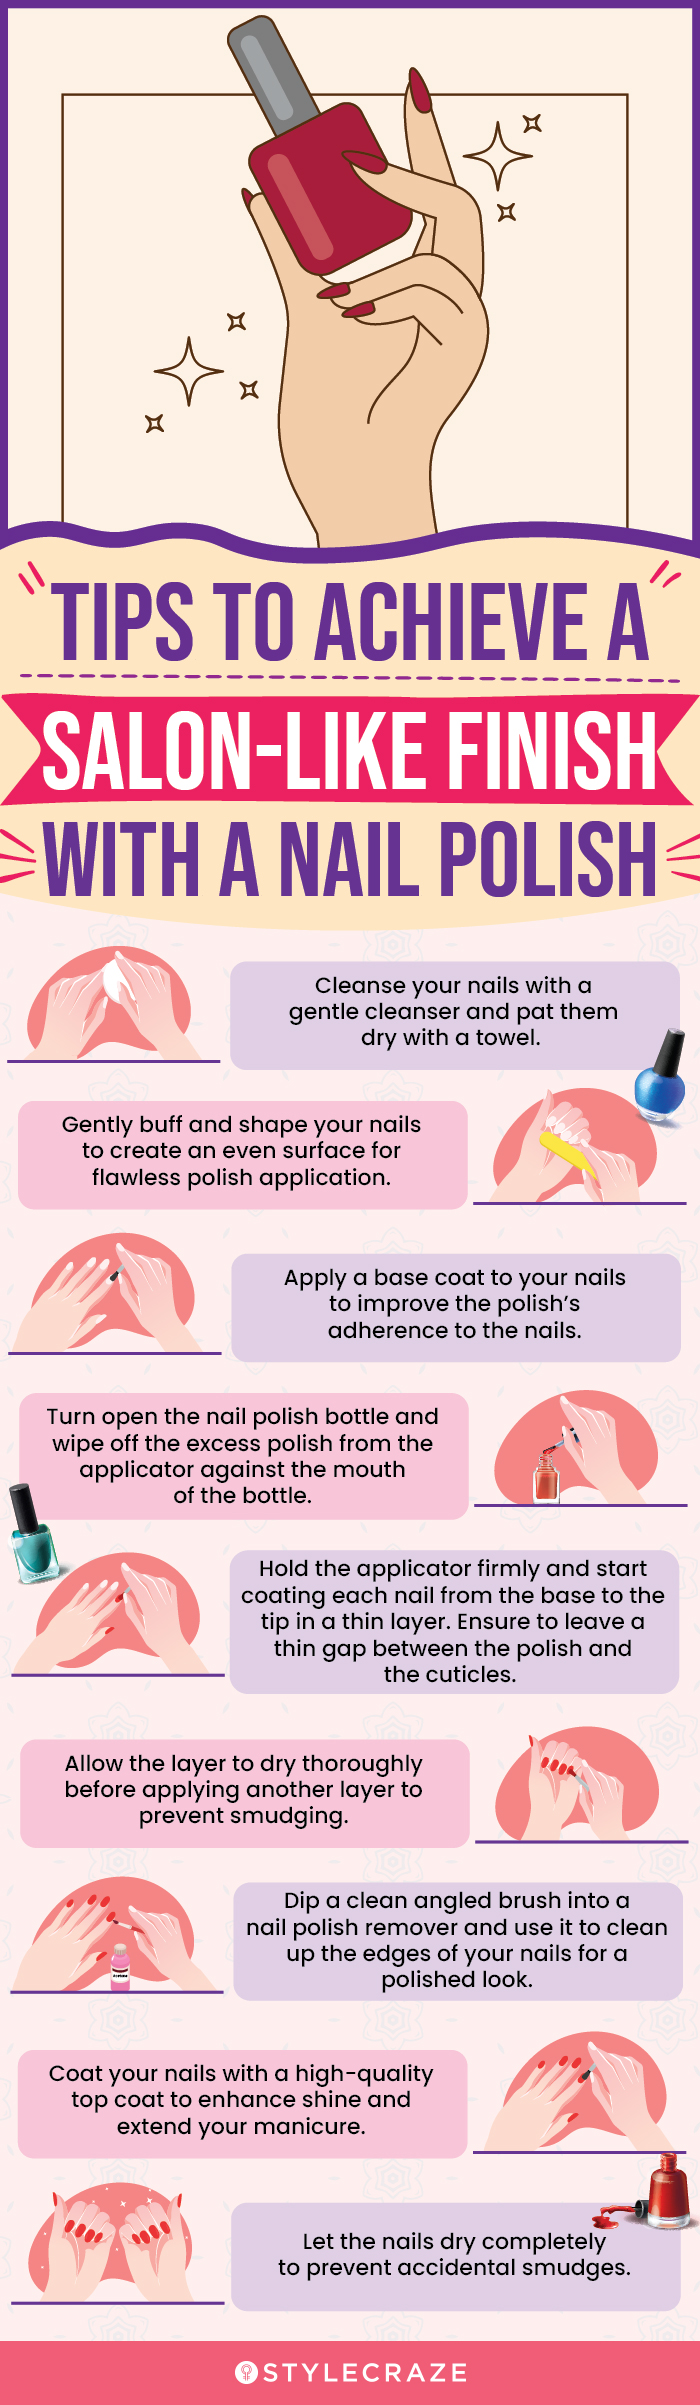  Tips To Achieve A Salon-Like Finish With A Nail Polish (infographic)